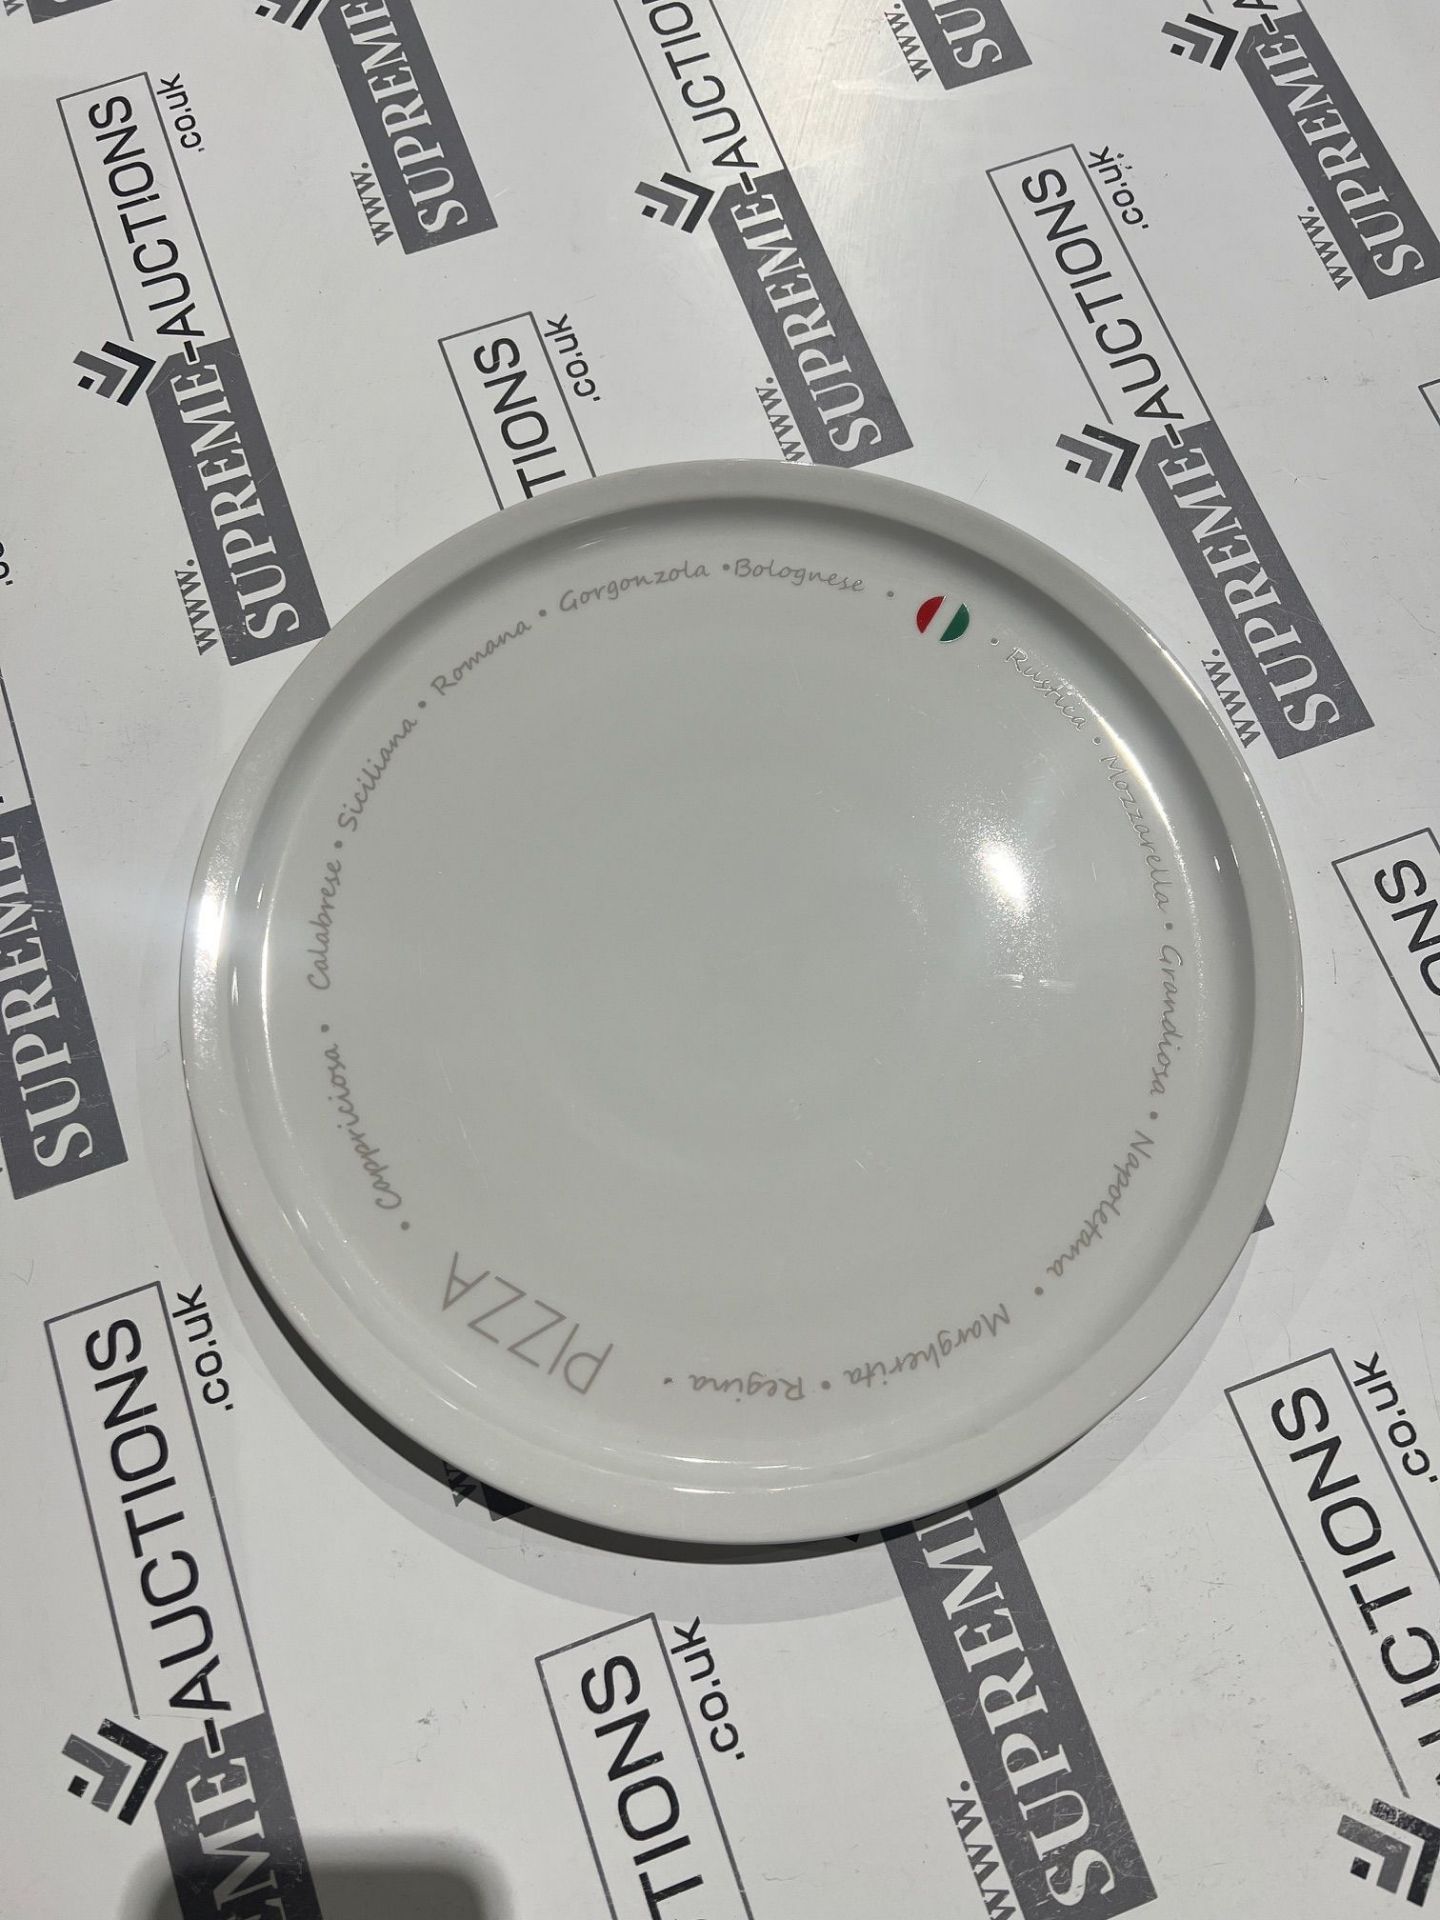 72 X BRAND NEW ARTMADIS NOVASTYL PIZZA ROUND PLATES WITH FLAG DETAIL, Dishwasher and microwavable - Image 2 of 2